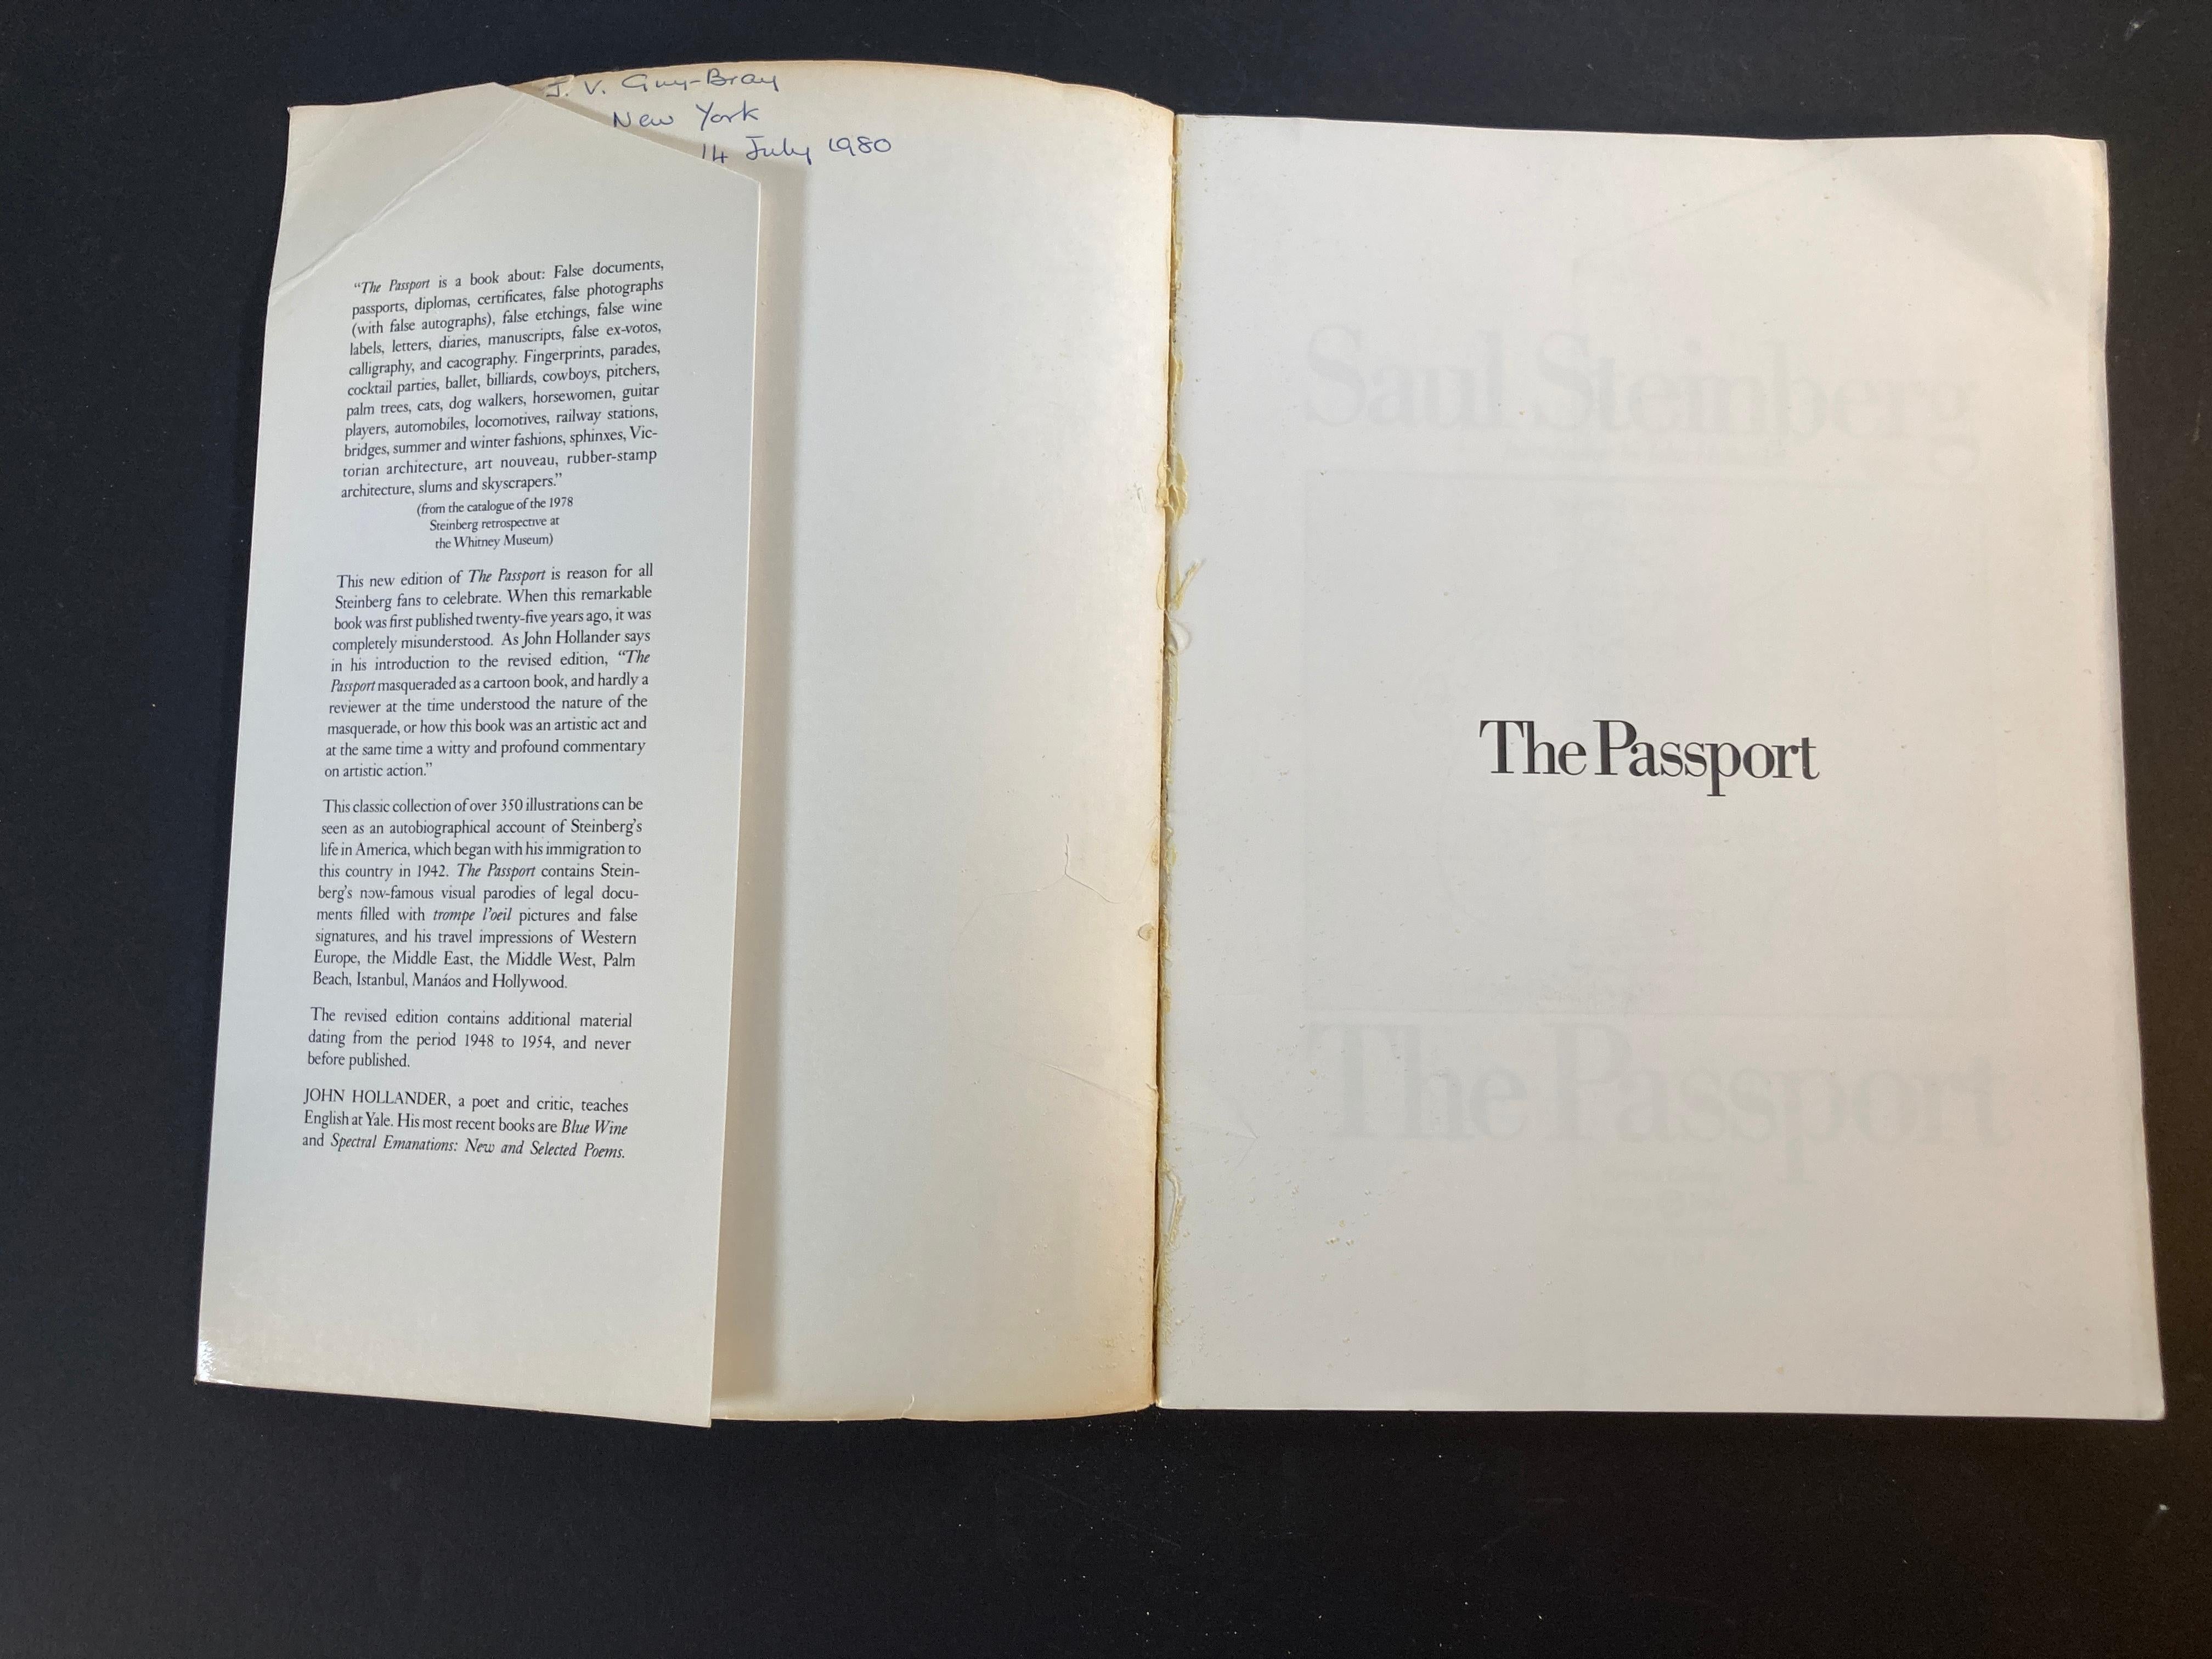 North American Passport Saul Steinberg Published by Harper & Brothers, New York., 1979 For Sale